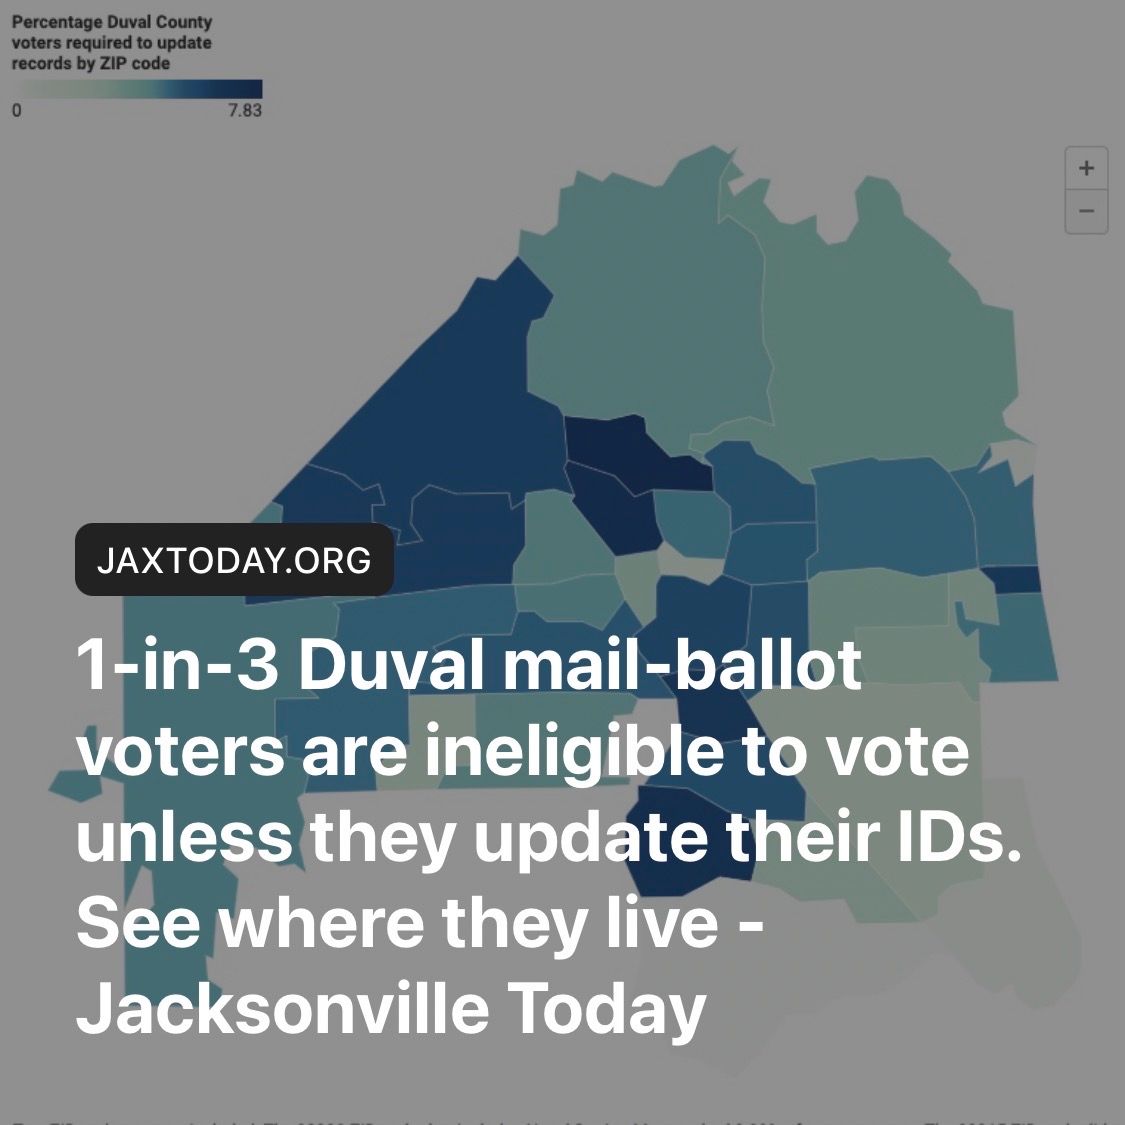 Featured image for “1-in-3 Duval mail-ballot voters are ineligible to vote unless they update their IDs. See where they live”